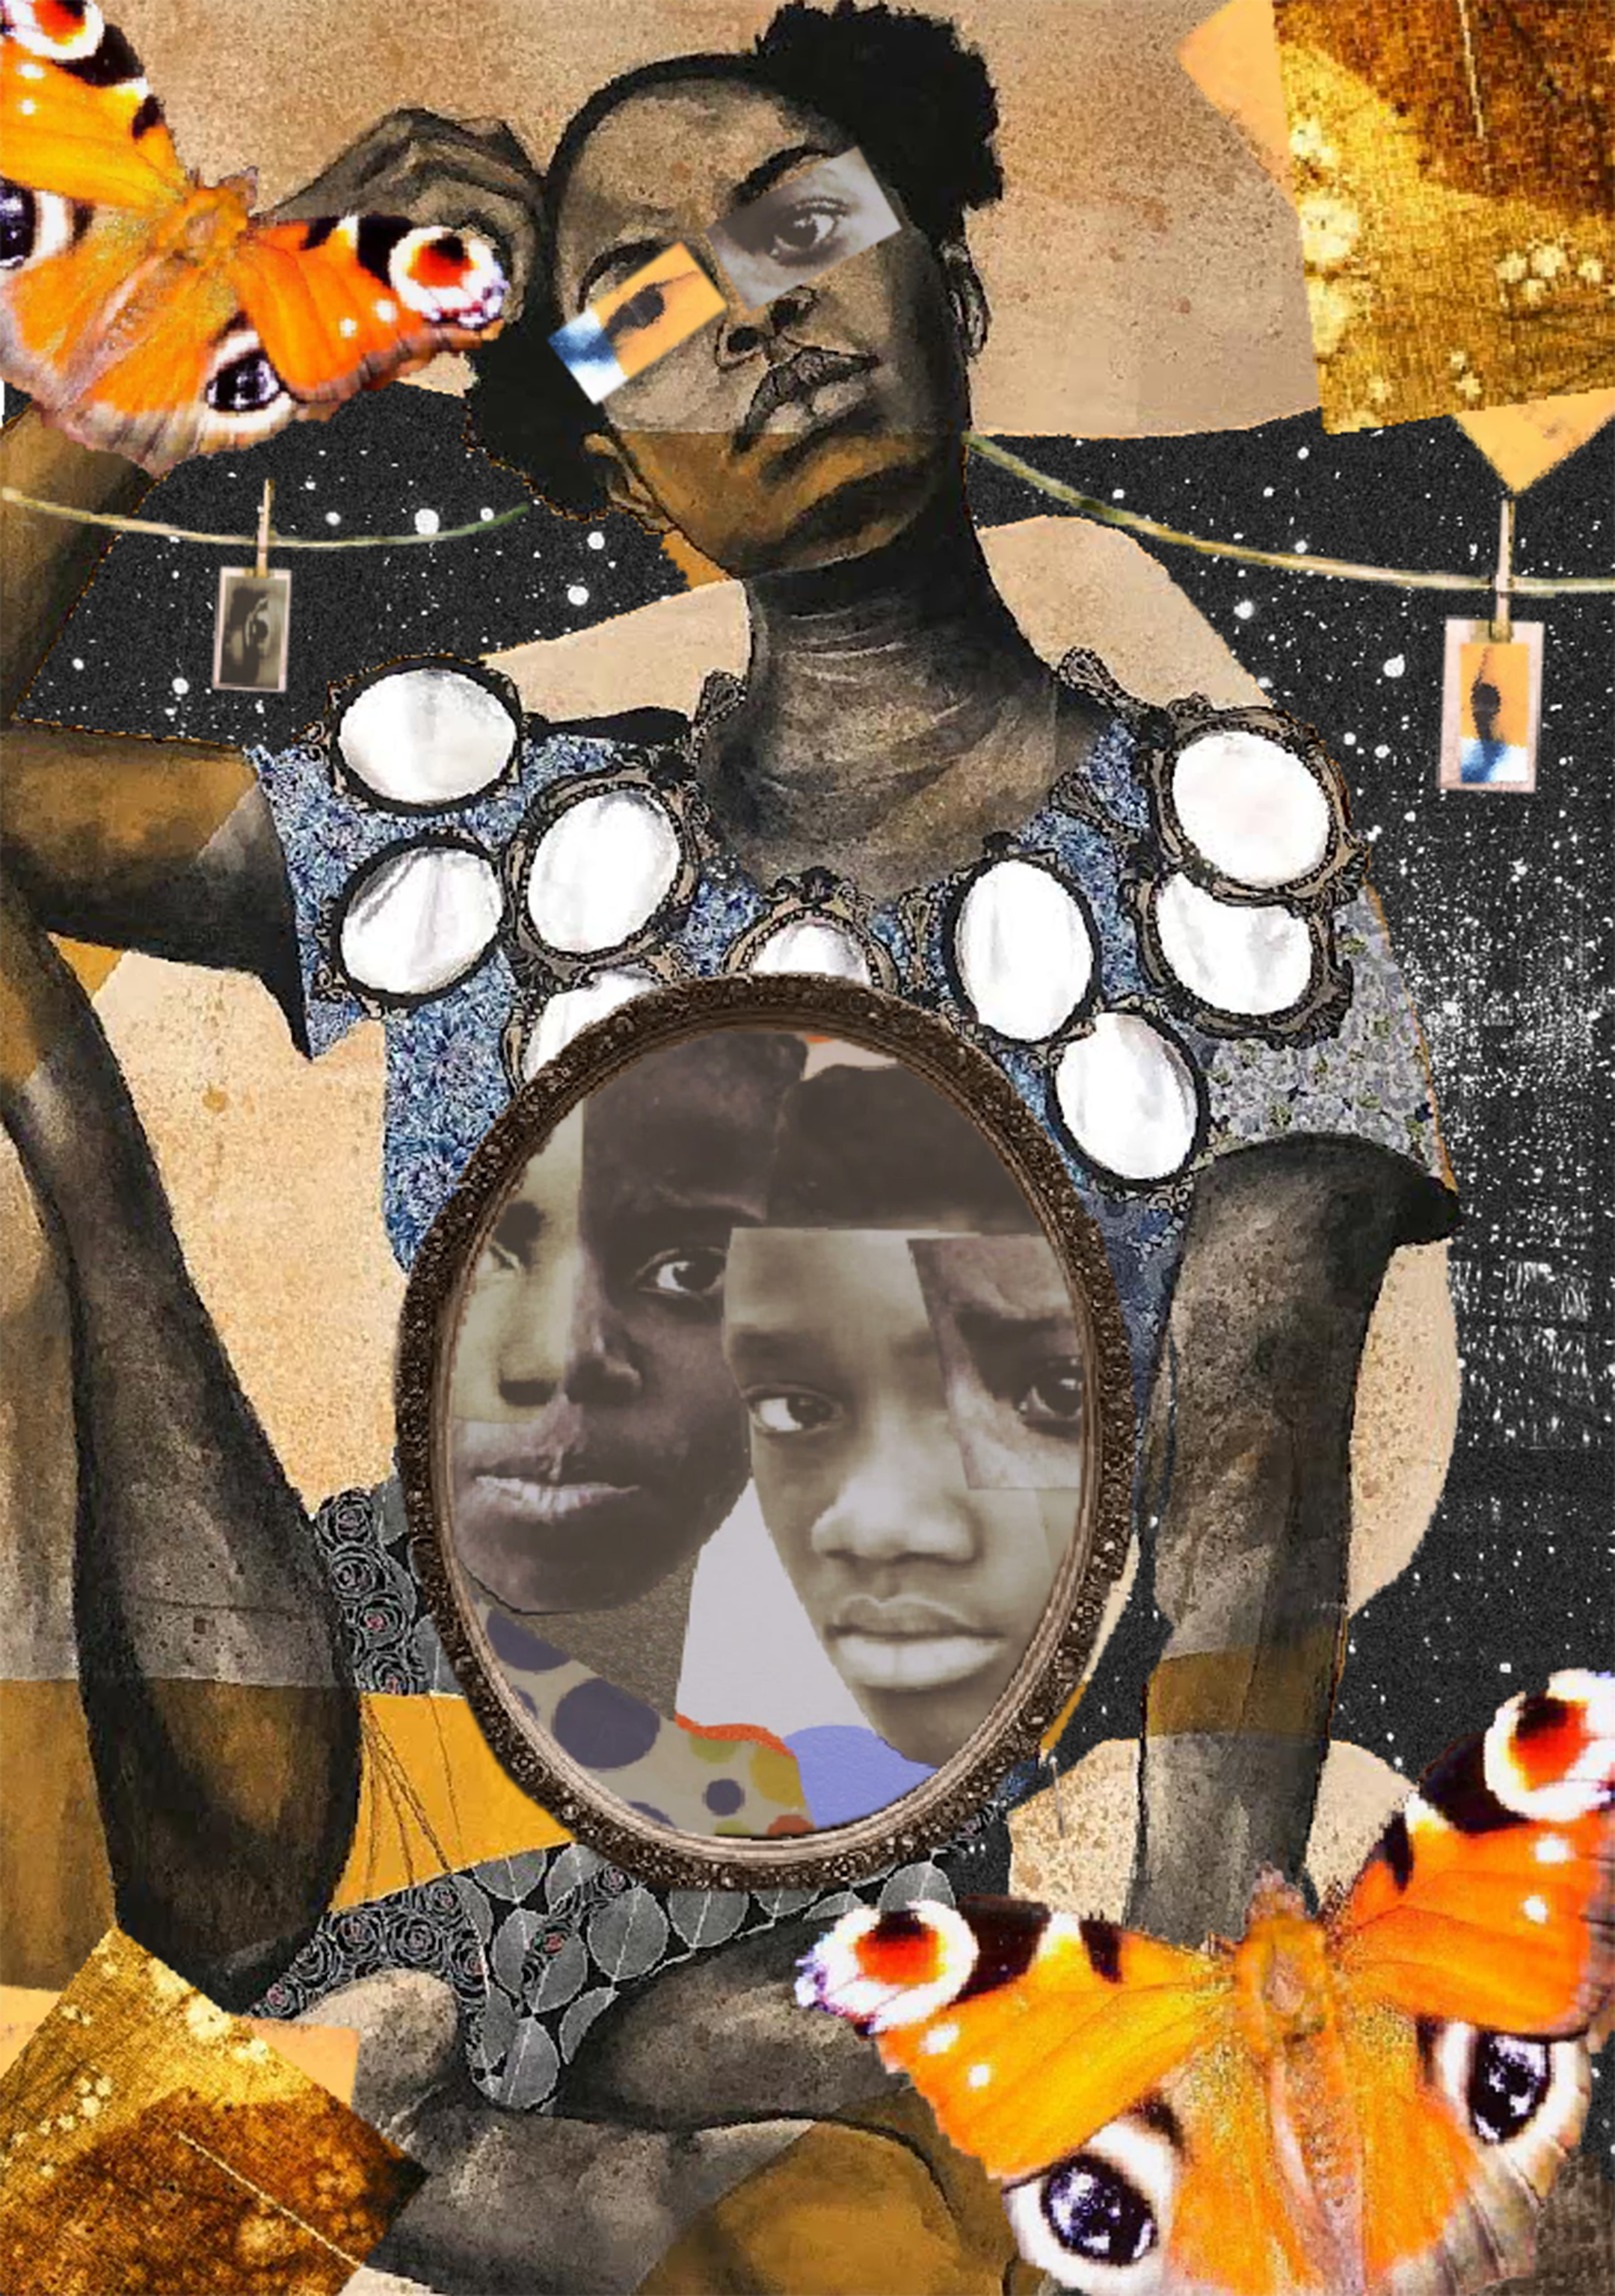 Illustrative collage of a young black woman against an orange background with an oval mirror-like frame in the middle depicting two young black men